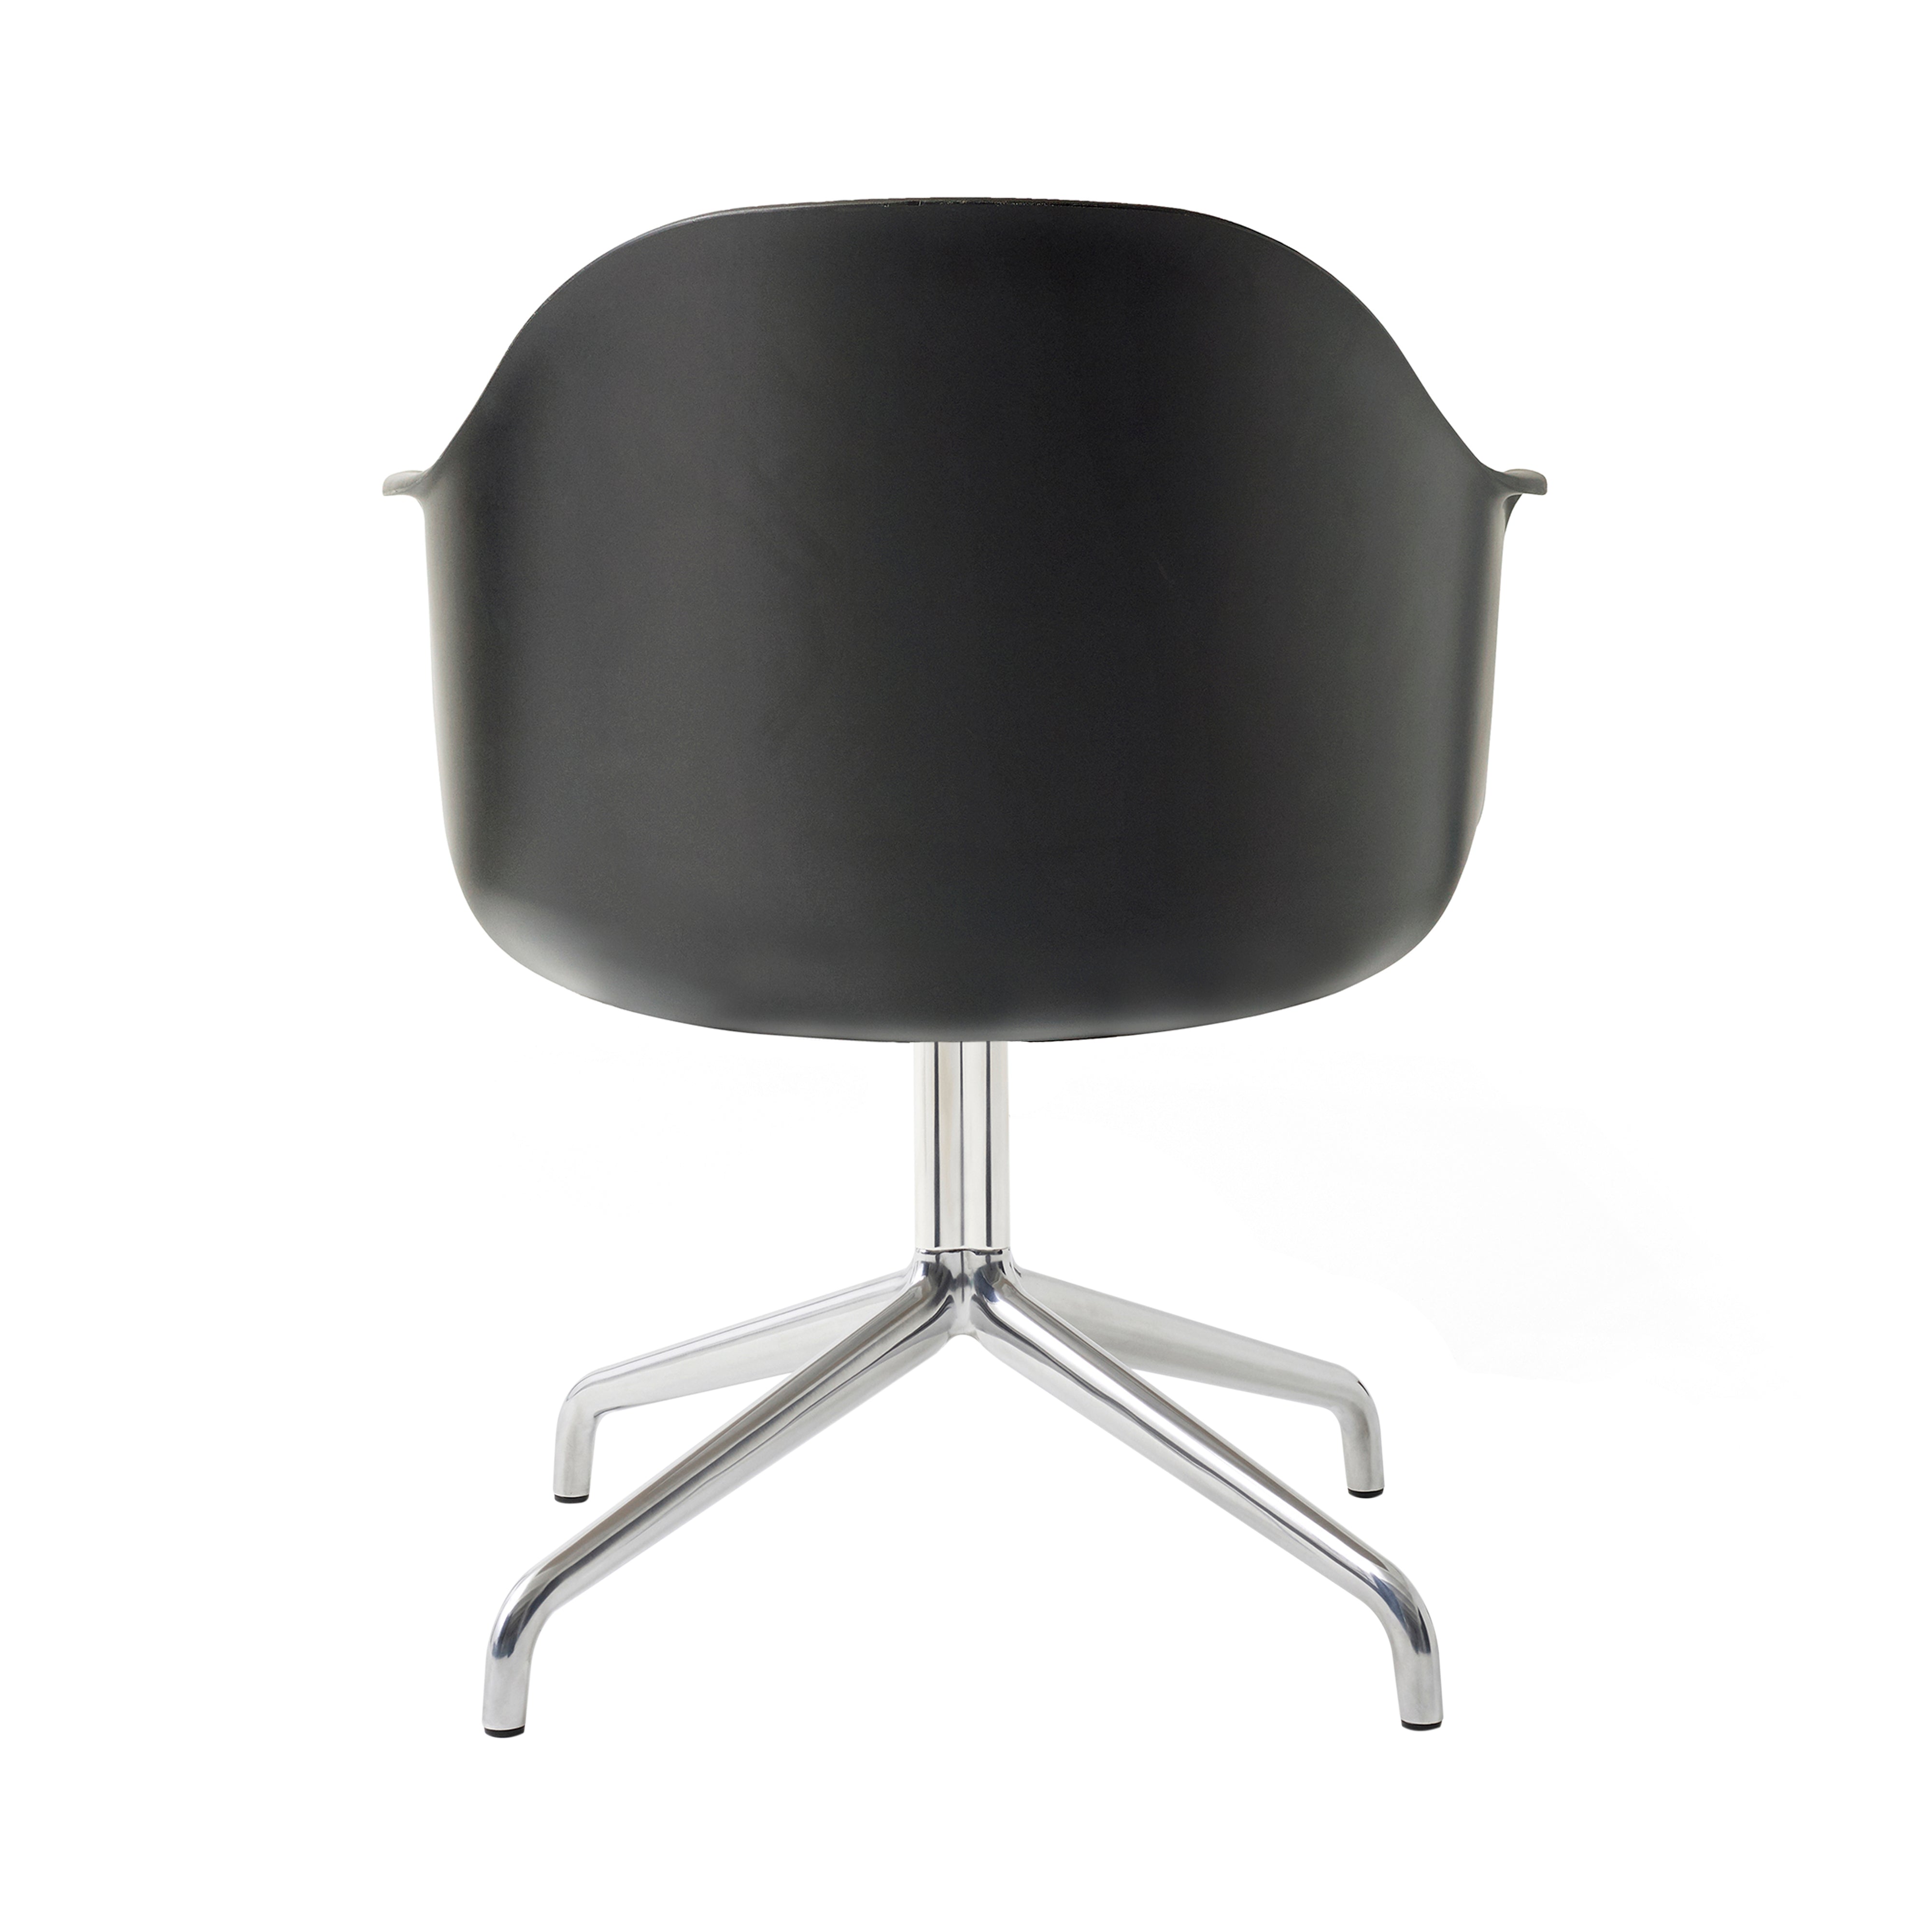 Harbour Dining Chair: Star Base + Polished Aluminum + Black